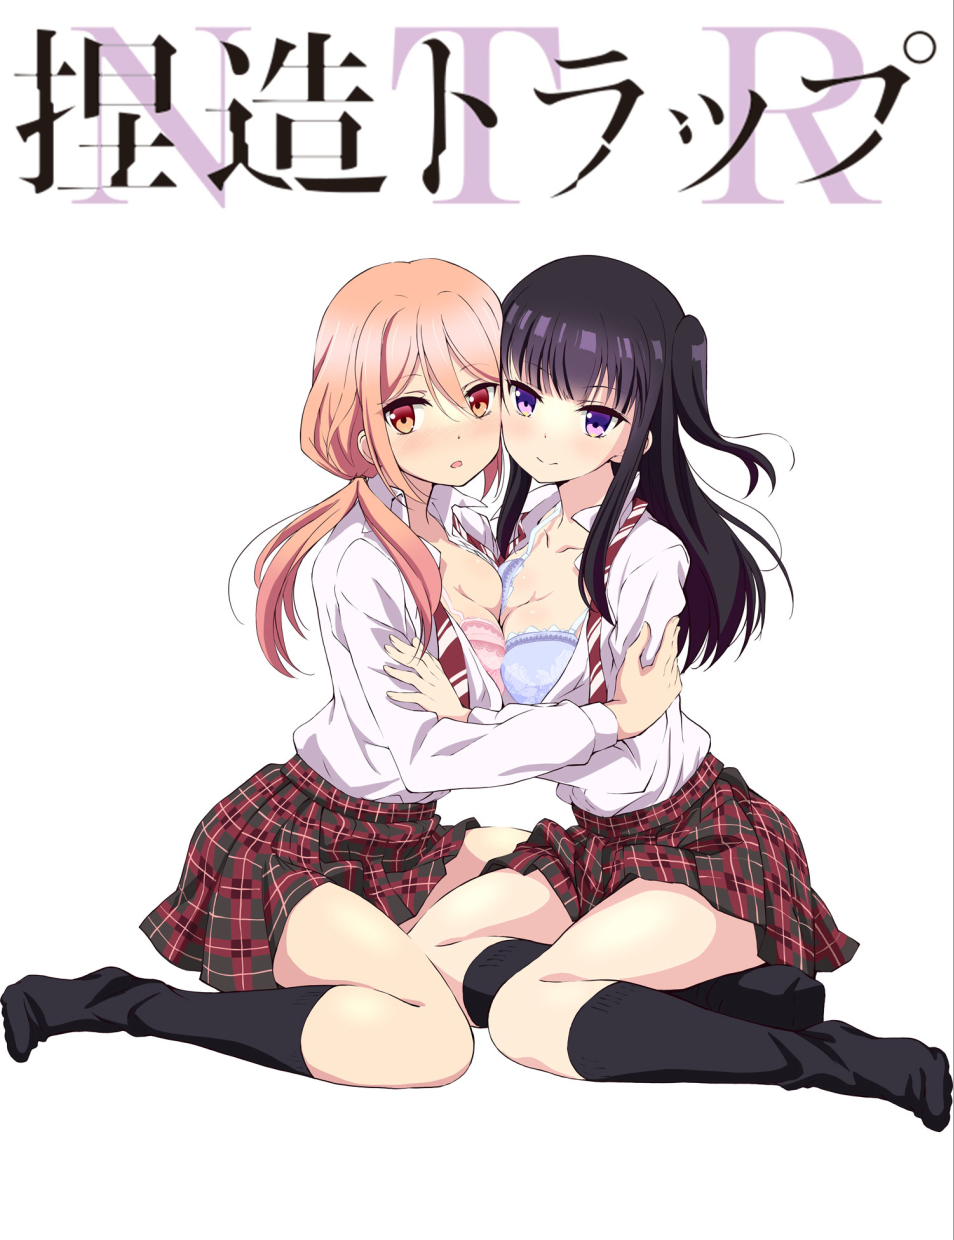 NTR: Netsuzou Trap TV anime new key visual; airs July.
-Synopsis-
“Yuma and Hotaru have been friends since childhood, so it’s only natural that when Yuma is nervous about her new boyfriend, she asks Hotaru for advice. But when Hotaru starts coming...